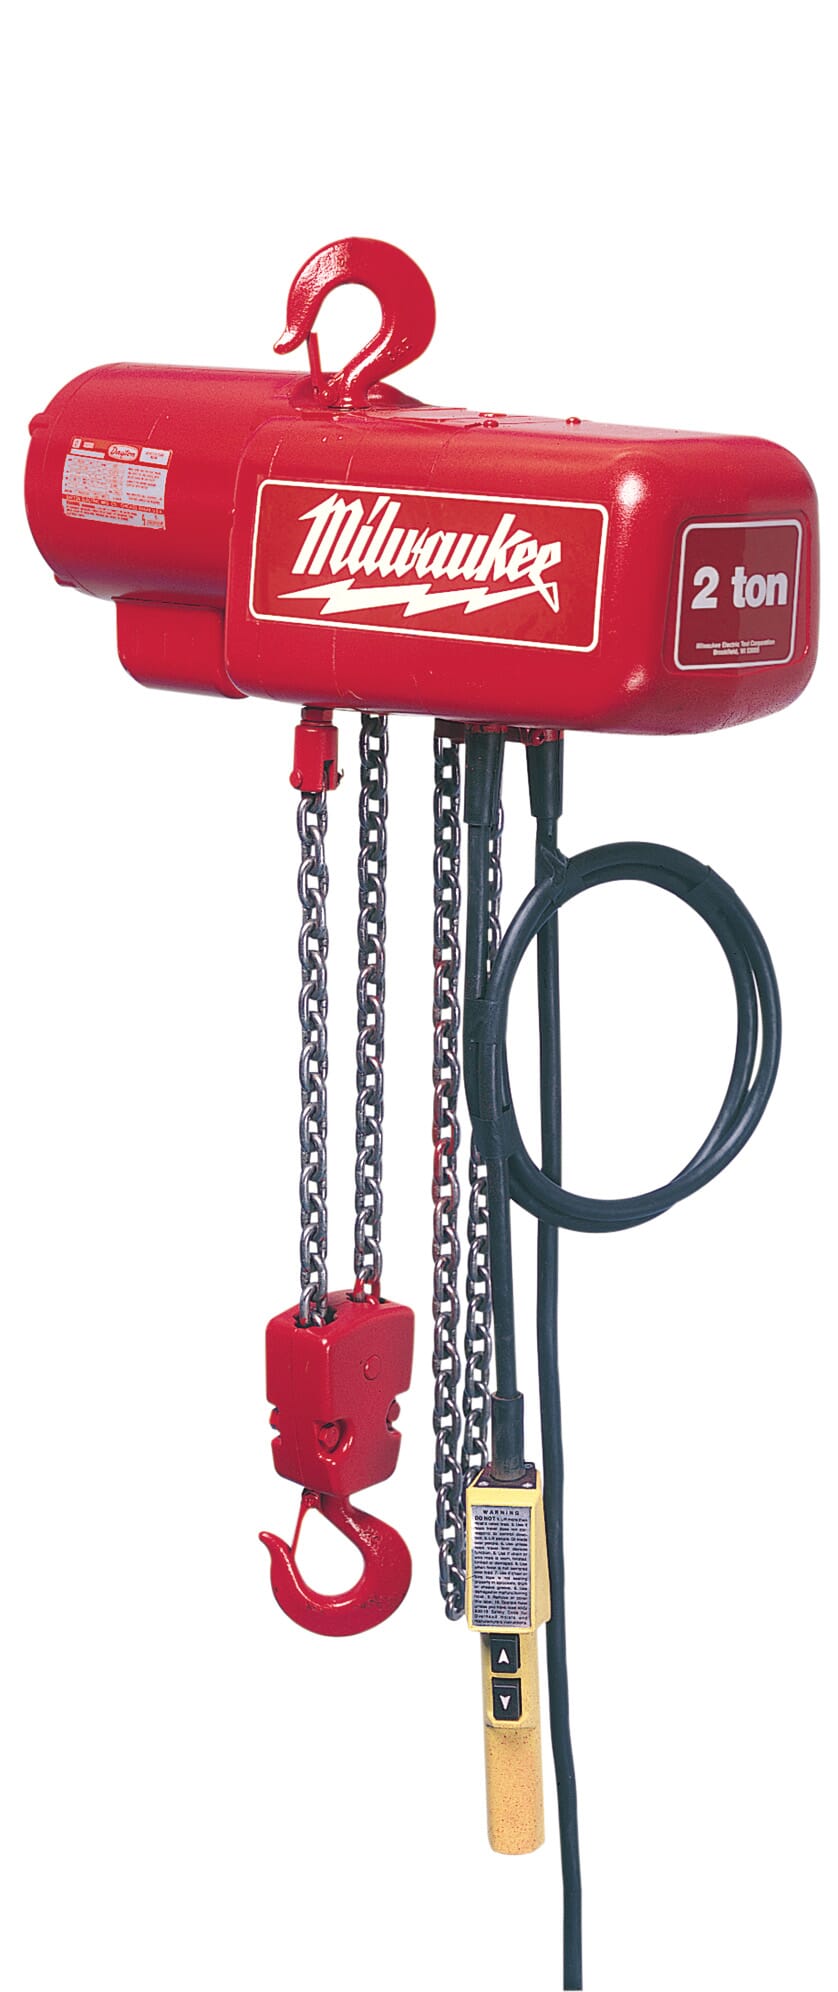 Milwaukee® 9570 1-Phase Lightweight Electric Chain Hoist, 2 ton Load, 10 ft H Lifting, 1 hp Power Rating, 115 to 230 VAC